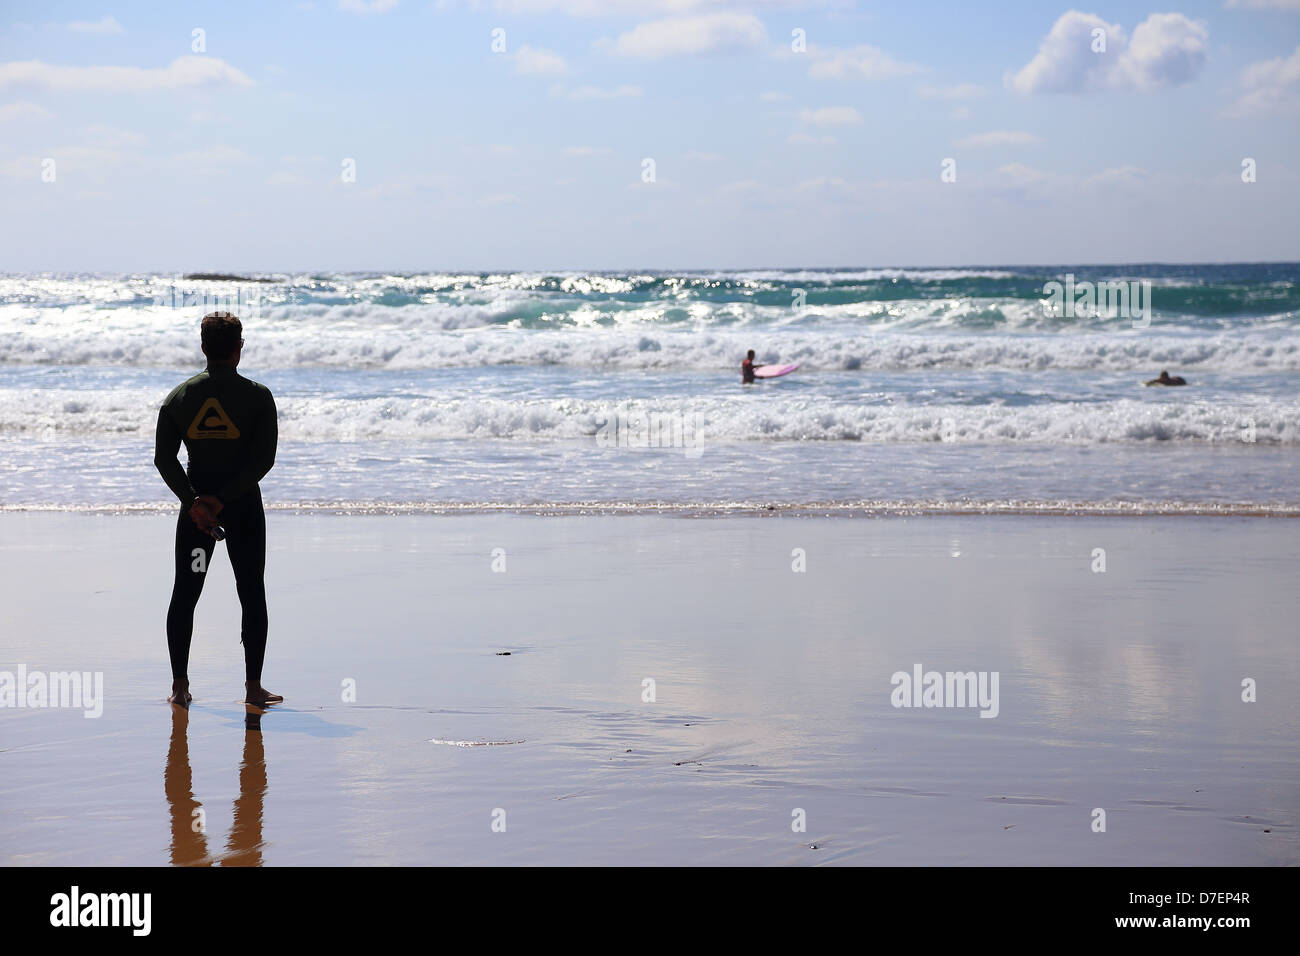 Surfer looking at the sea, Amado beach, Costa Vicentina, Portugal Stock Photo